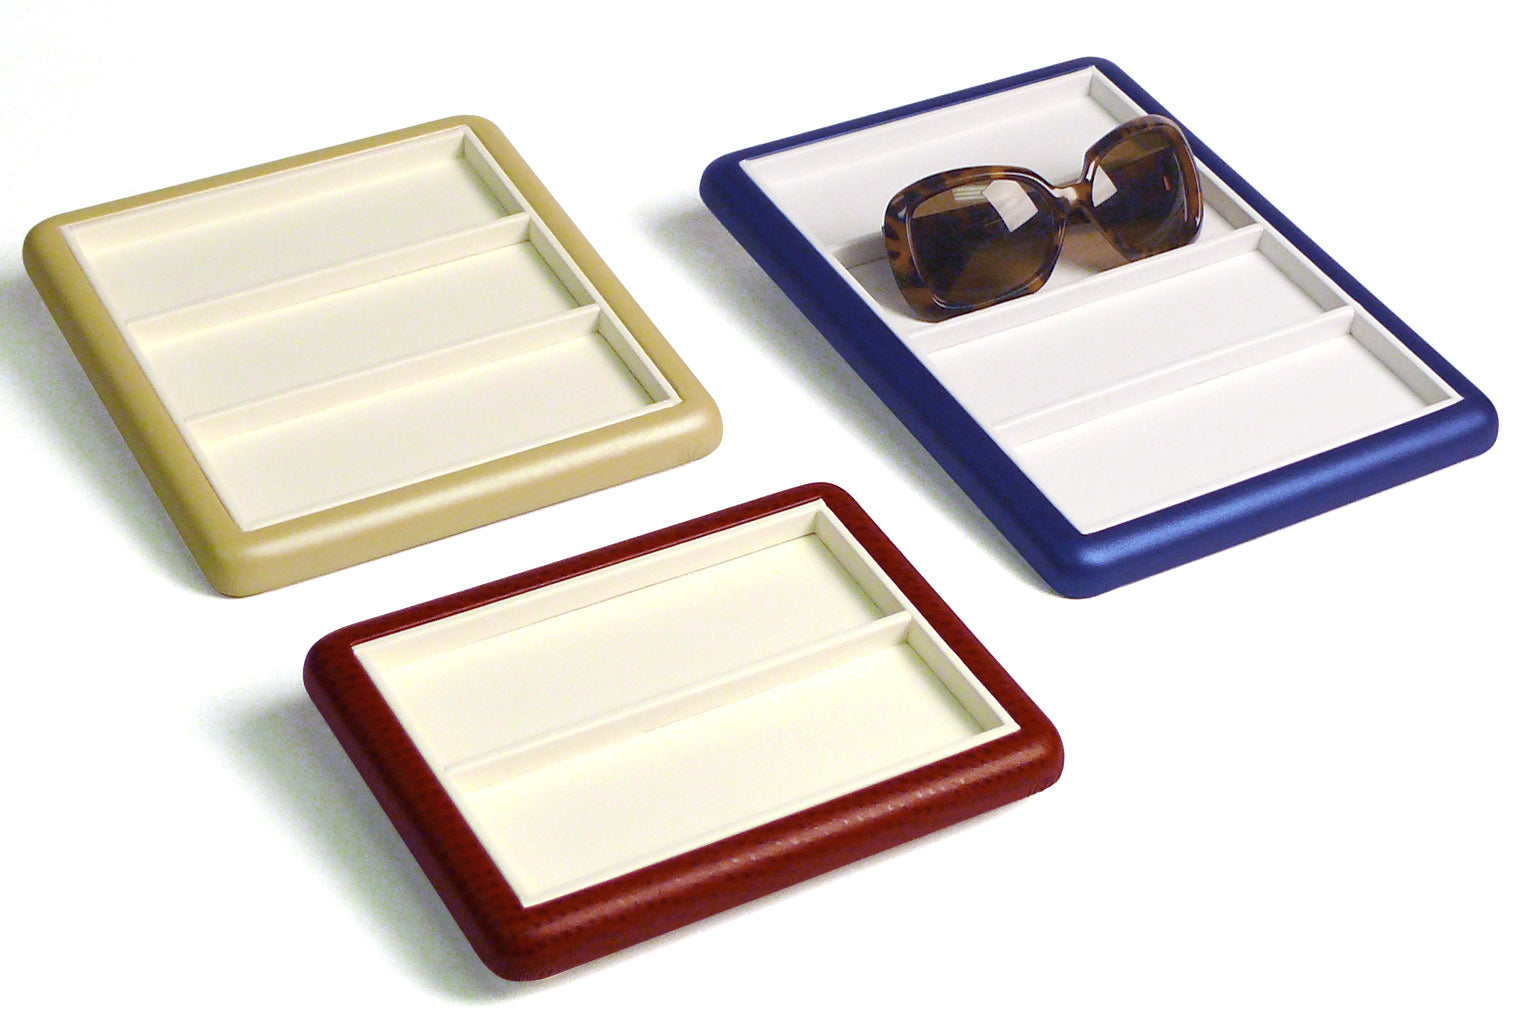 Presentation And Selection Trays